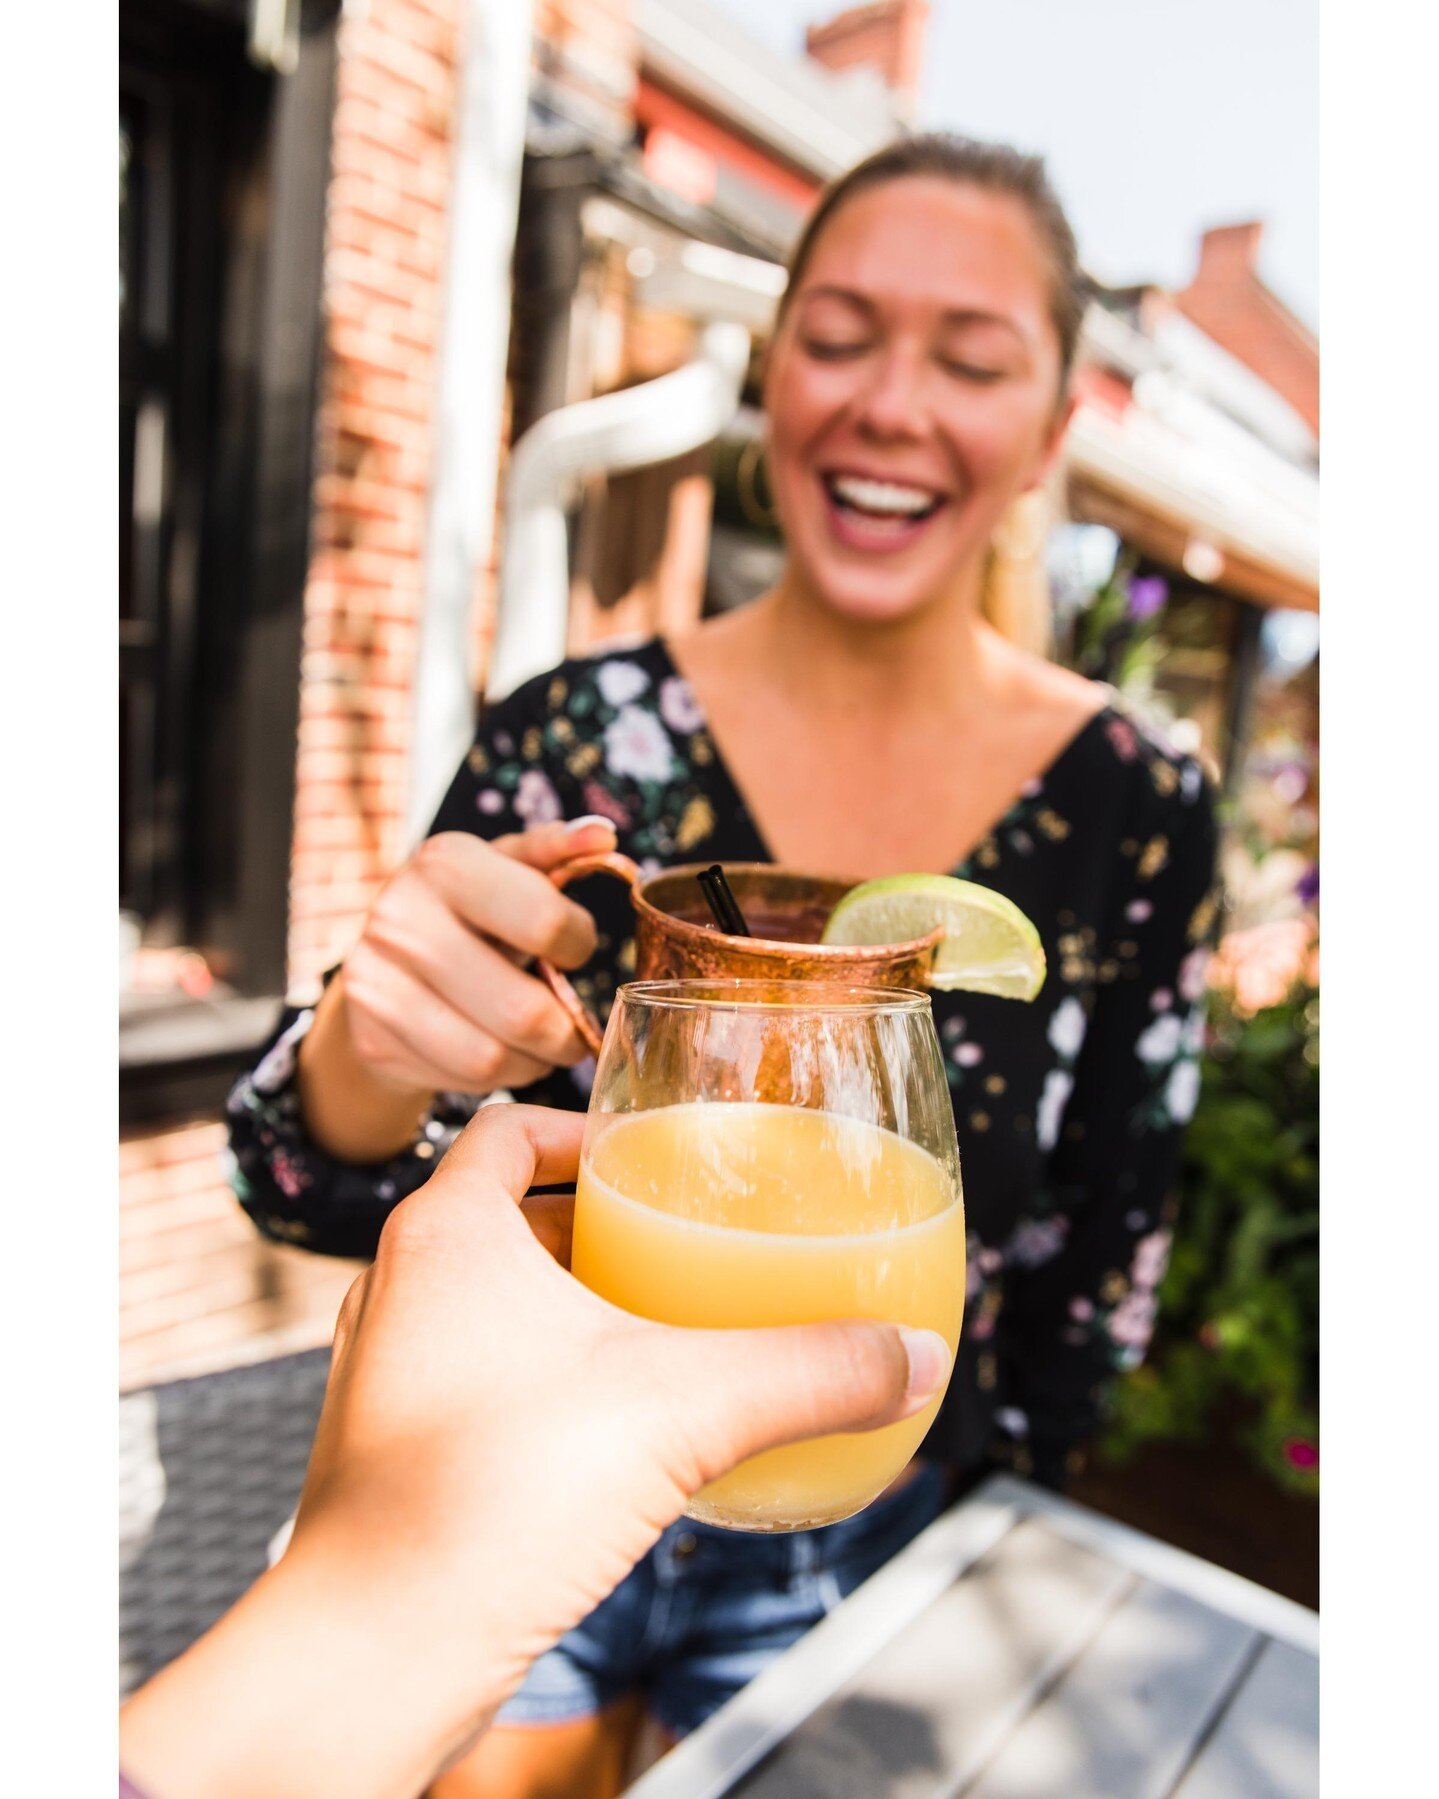 Cheers to the Moms! 🥂

Treat your mom to a mimosa and brunch on the patio.  It's the perfect place to celebrate with the whole family. 
.
.
.
#yum #food #carolinabrewery #firstinflavor #brewery #yummy #eaaat #dinner #brunch #brunchin #weekendvibes